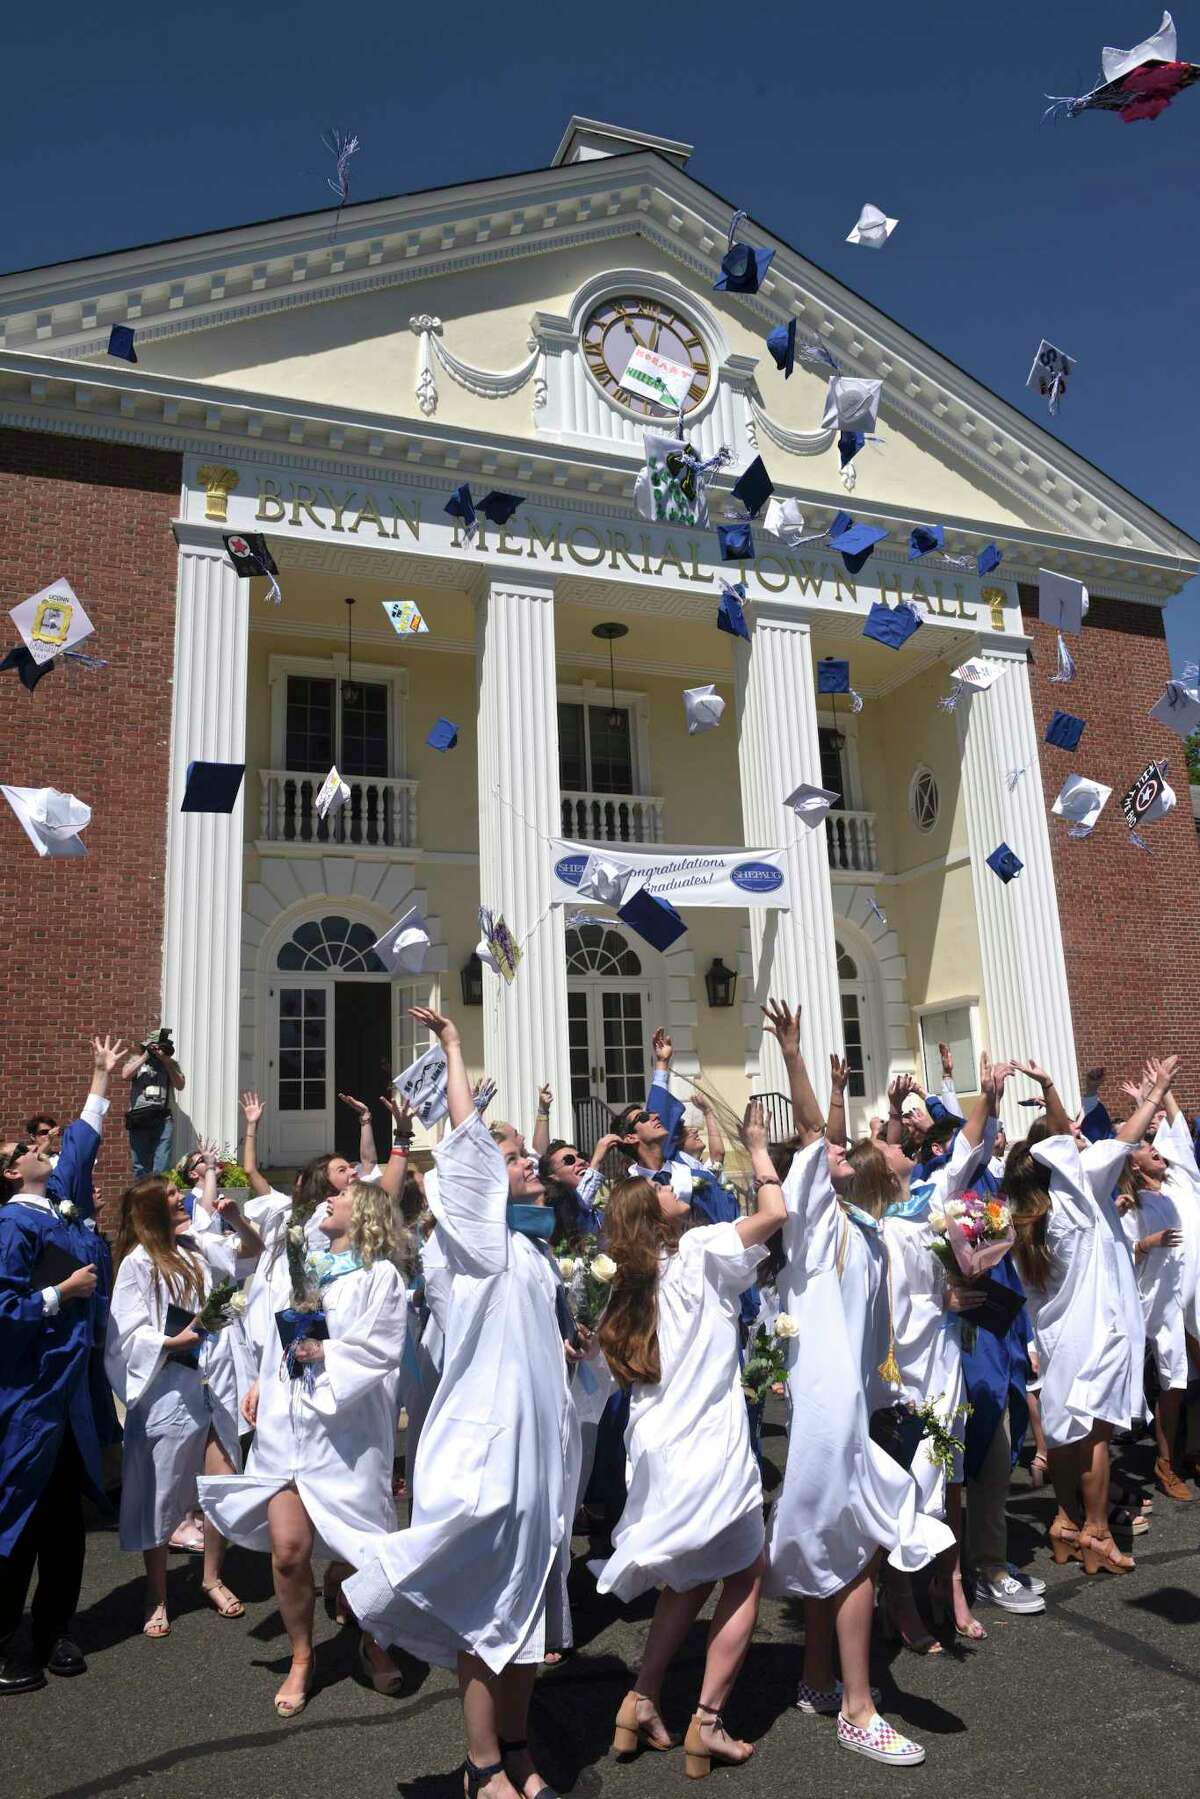 The graduates throw their caps in the air after the Shepaug Valley High School Class of 2019 Commencement, Saturday morning, June 15, 2019, on the Bryan Memorial Town Hall lawn, Washington, Conn.